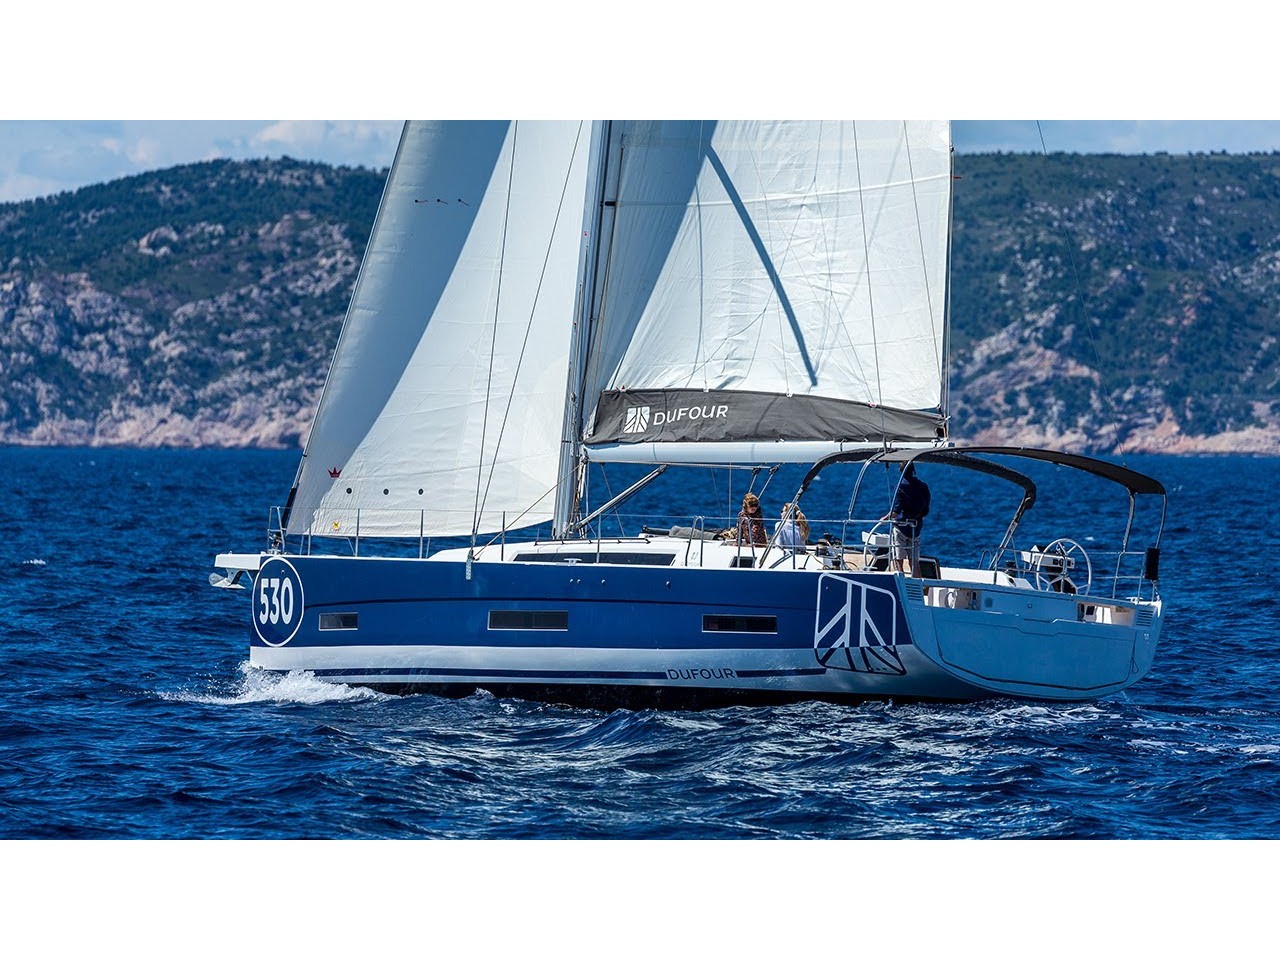 Yacht charter Dufour 530 - Italy, Sicilia, Palermo